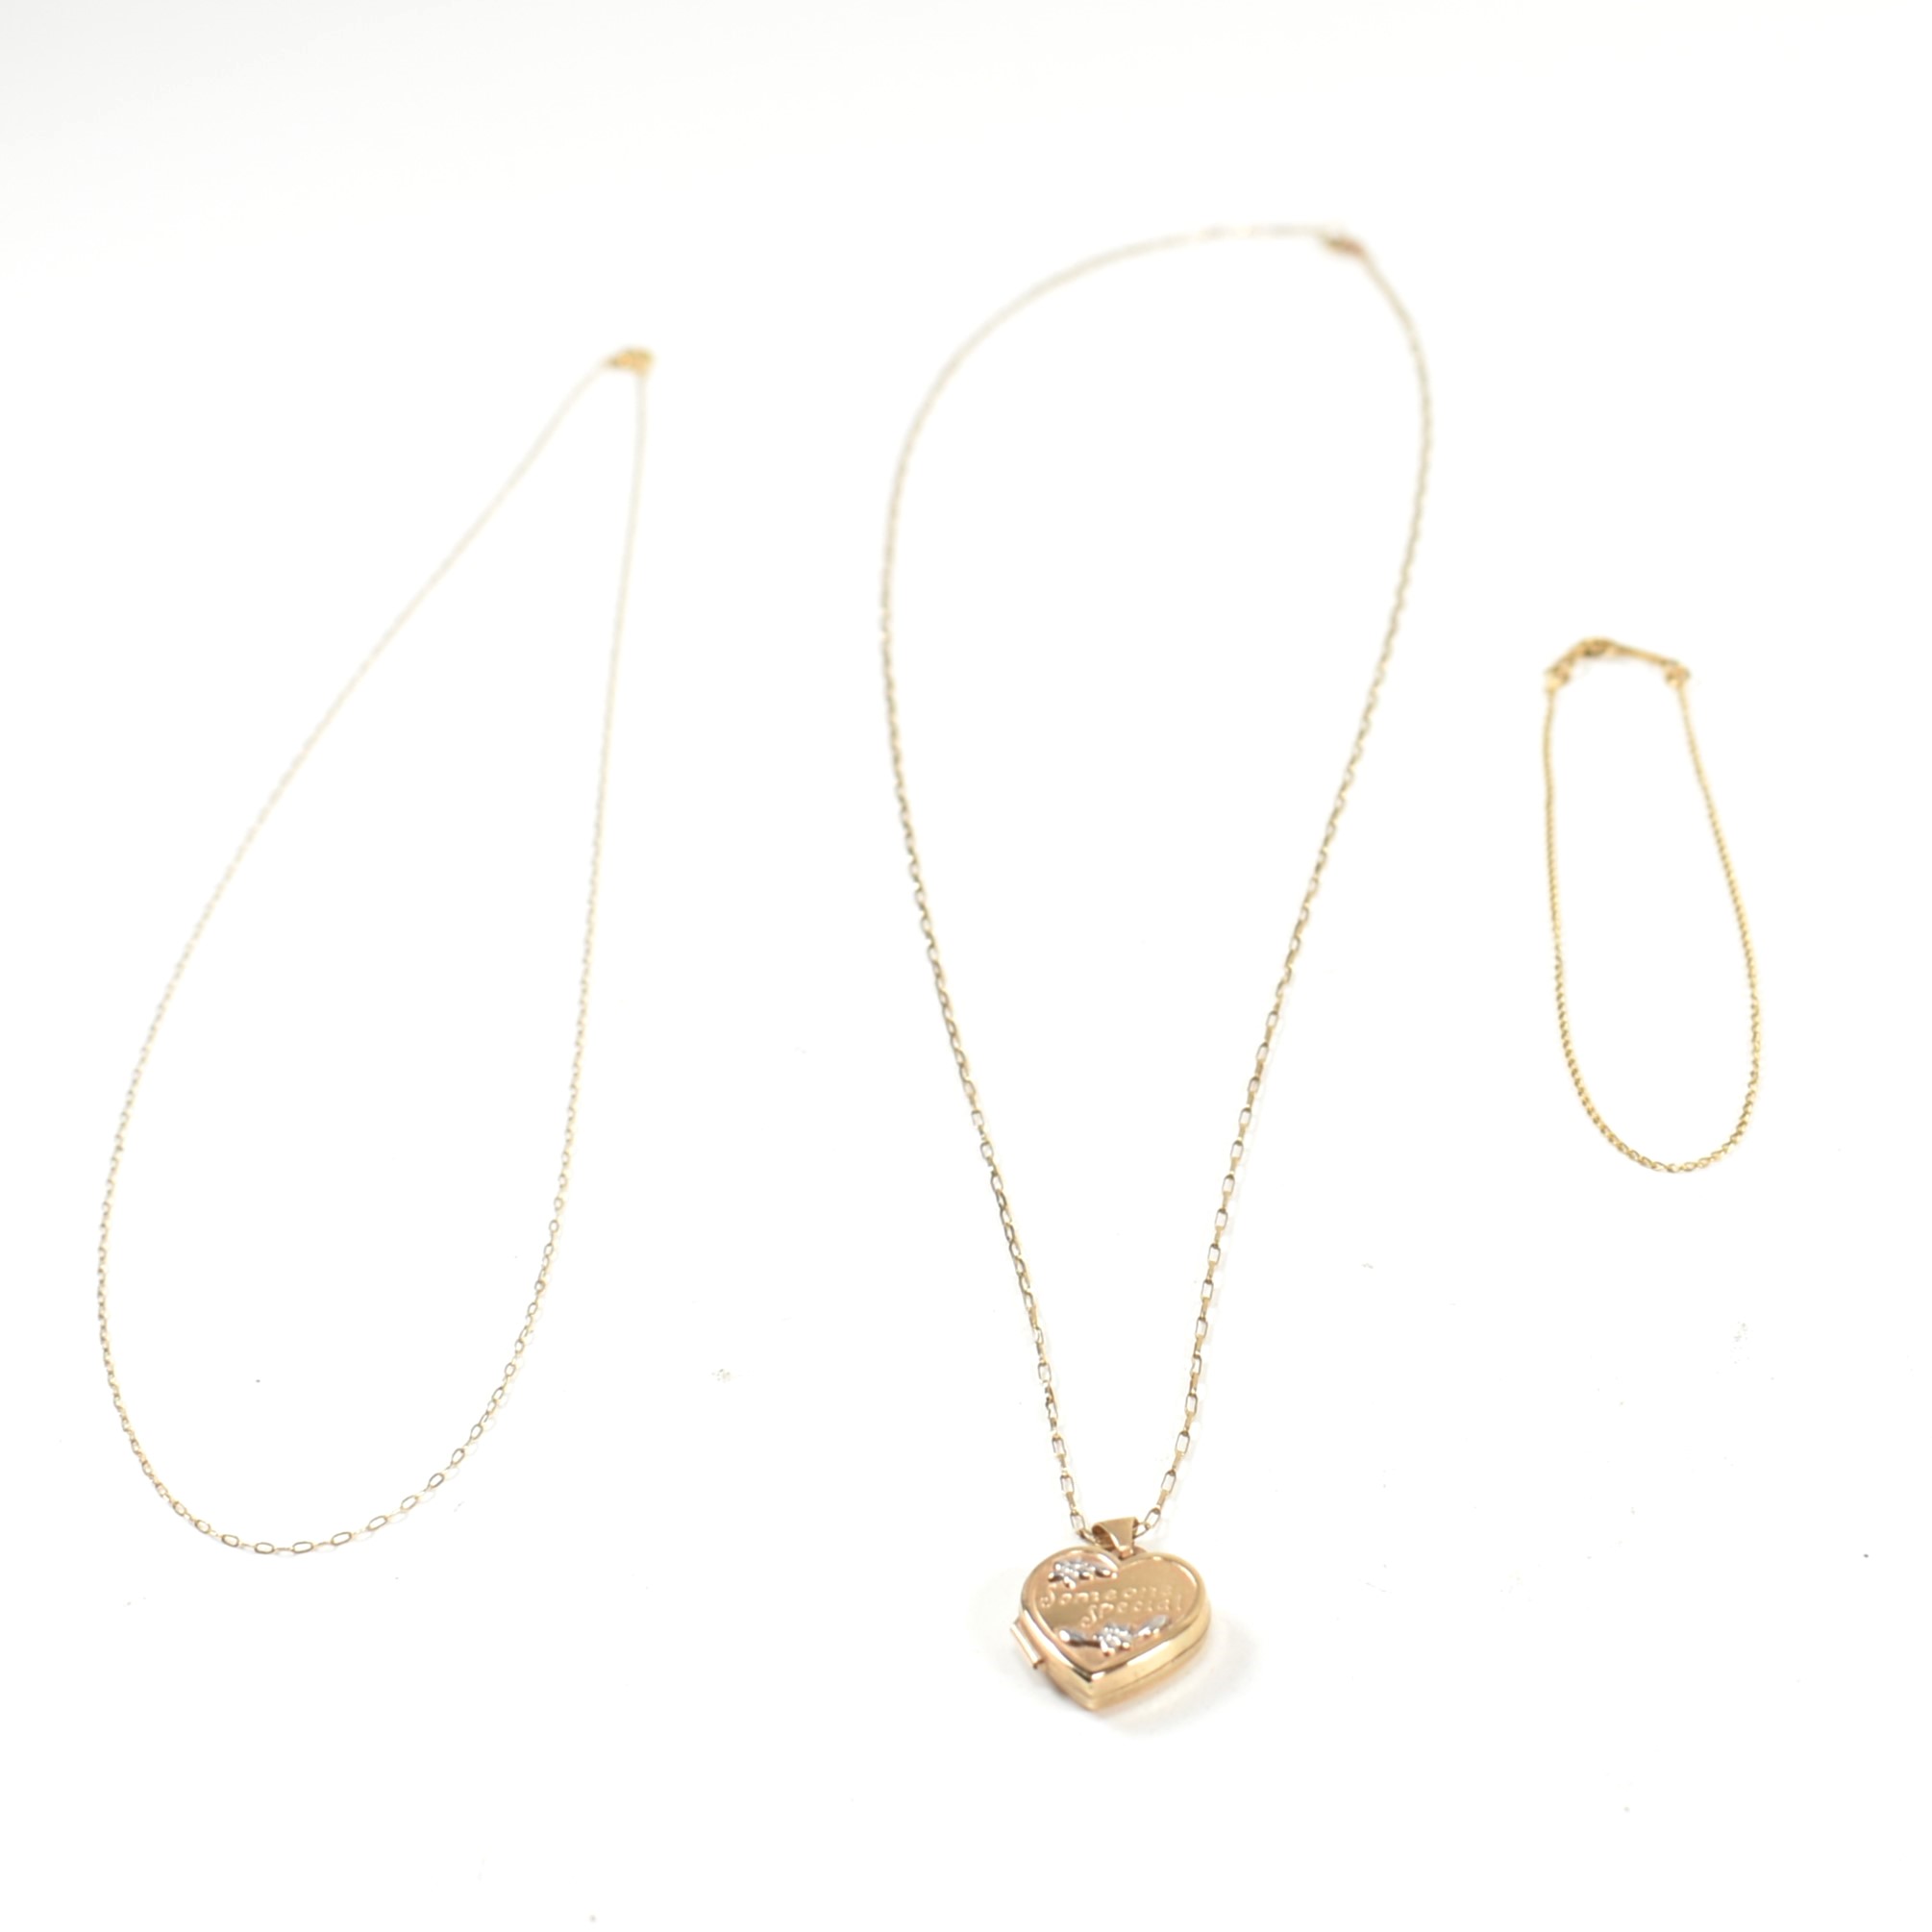 COLLECTION OF 9CT GOLD NECKLACES INCLUDING LOCKET - Image 6 of 6